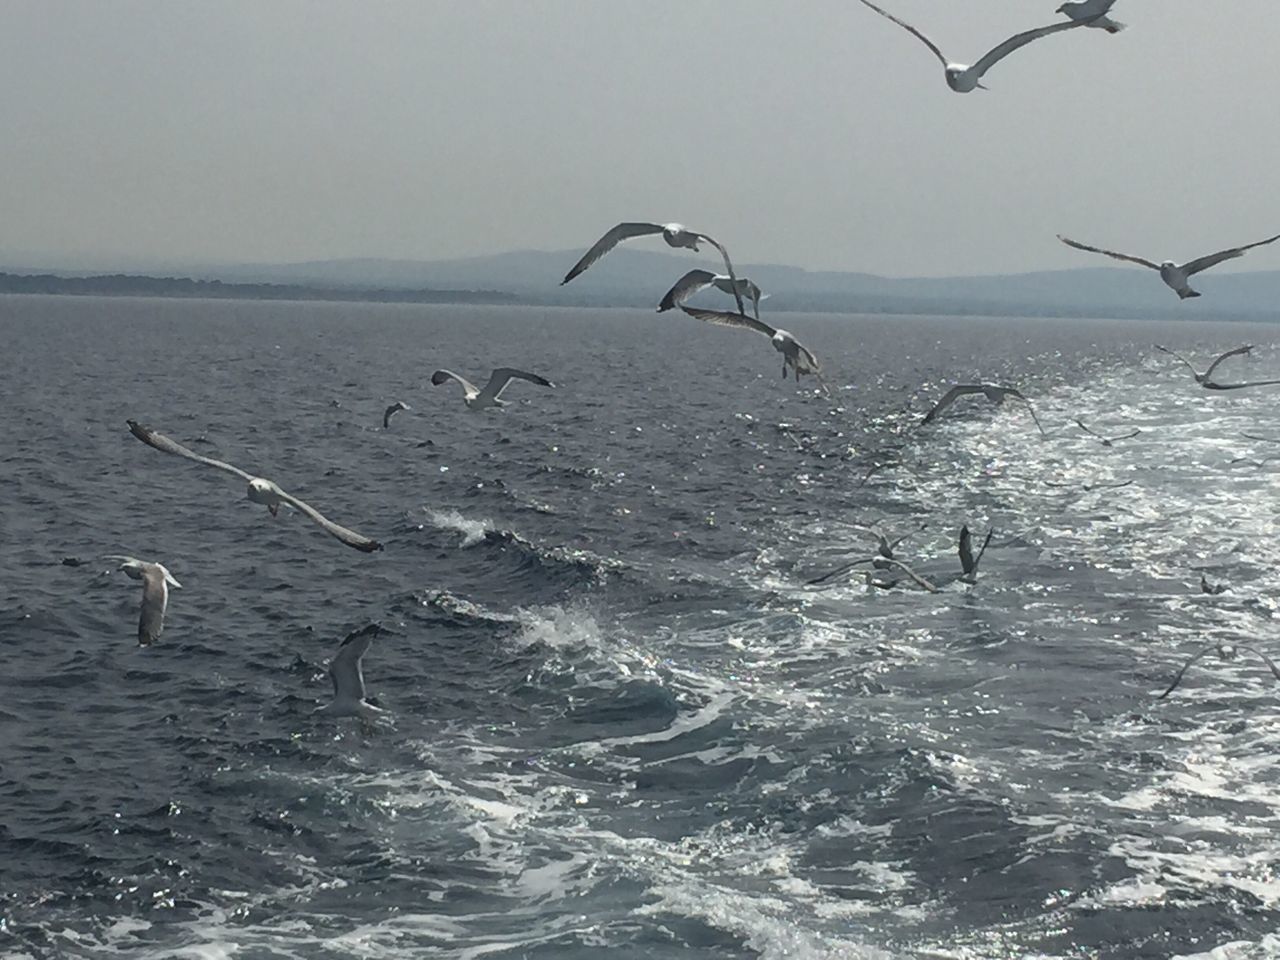 water, animals in the wild, sea, flying, animal themes, nature, bird, waterfront, large group of animals, horizon over water, mid-air, no people, animal wildlife, beauty in nature, day, rippled, spread wings, outdoors, tranquility, scenics, flock of birds, clear sky, wave, sky